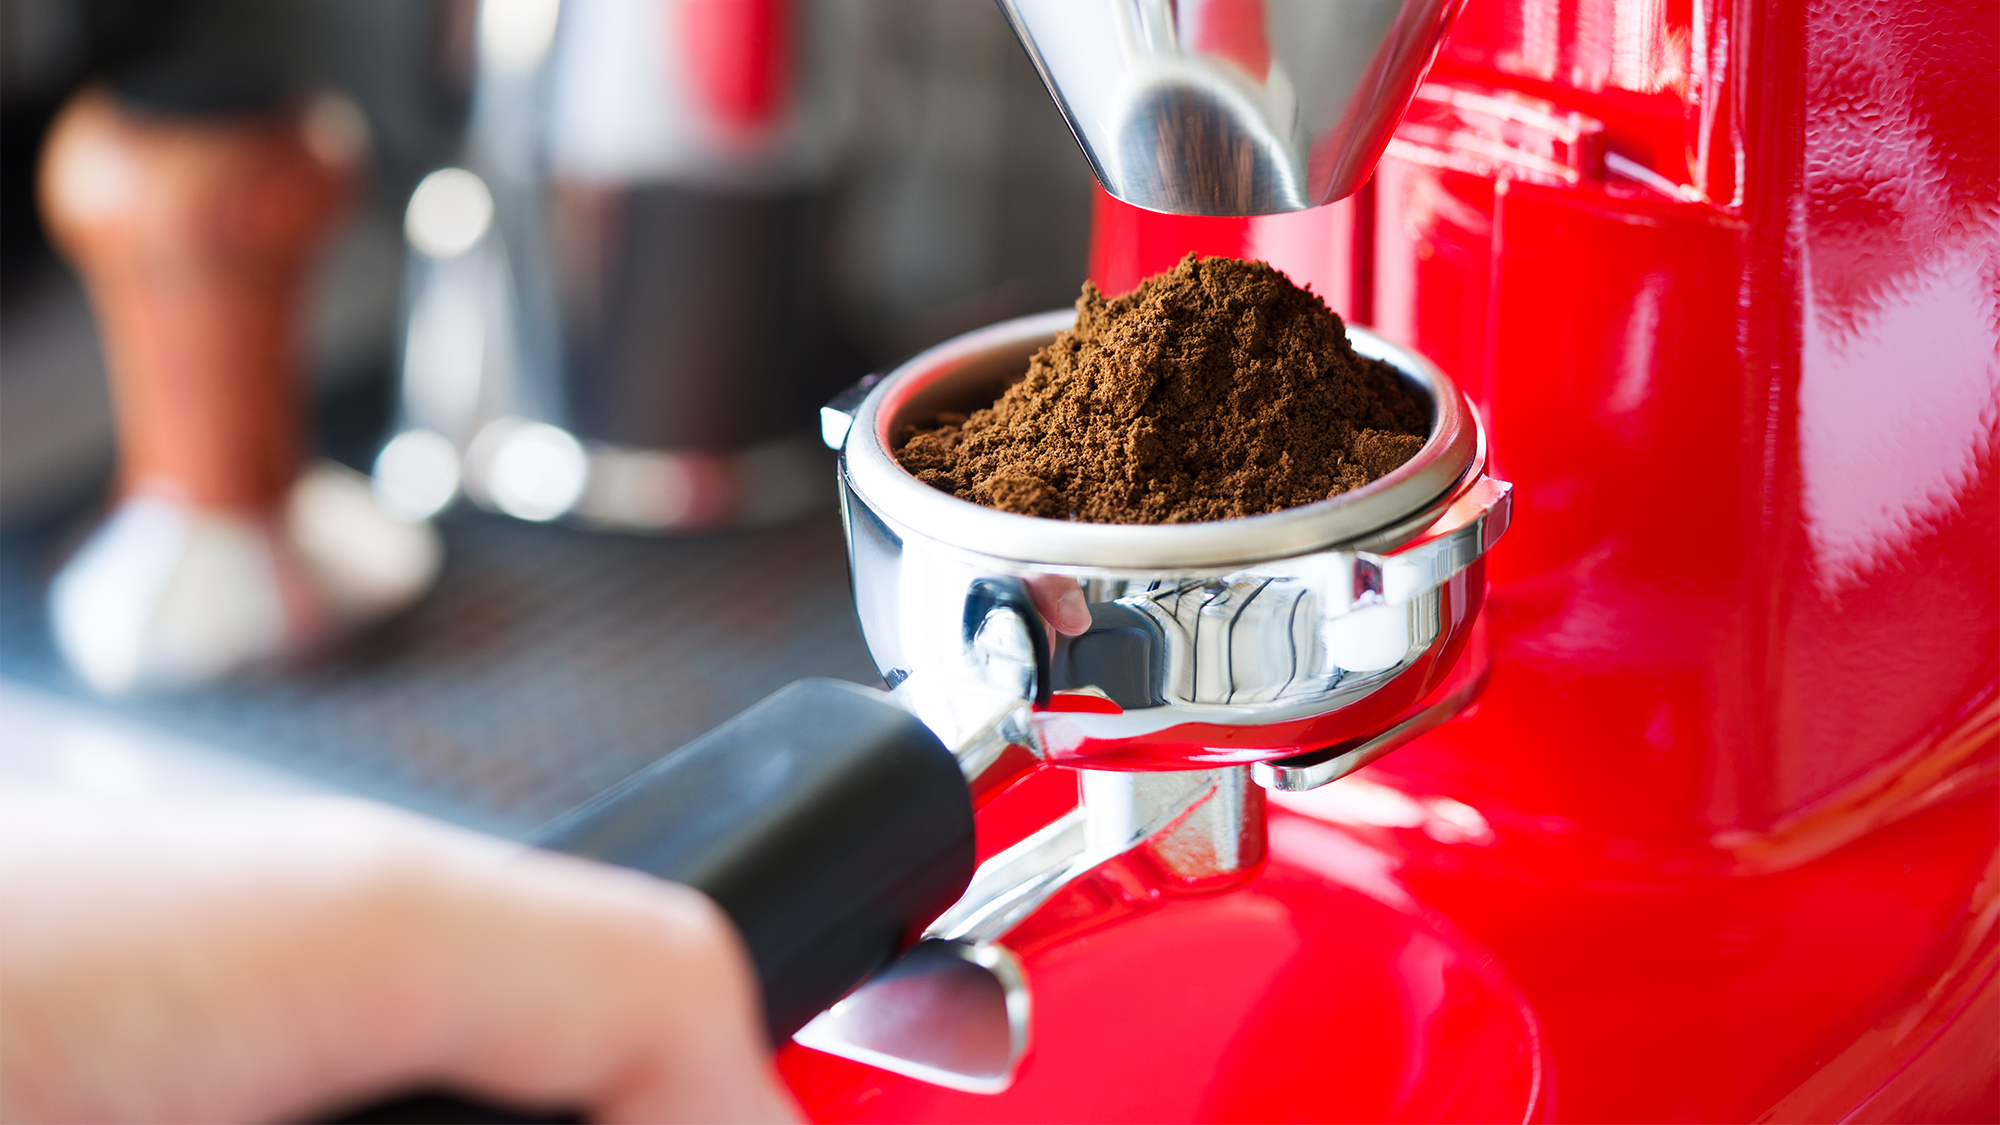 Finely ground bits of coffee come out of a red coffee grinder.